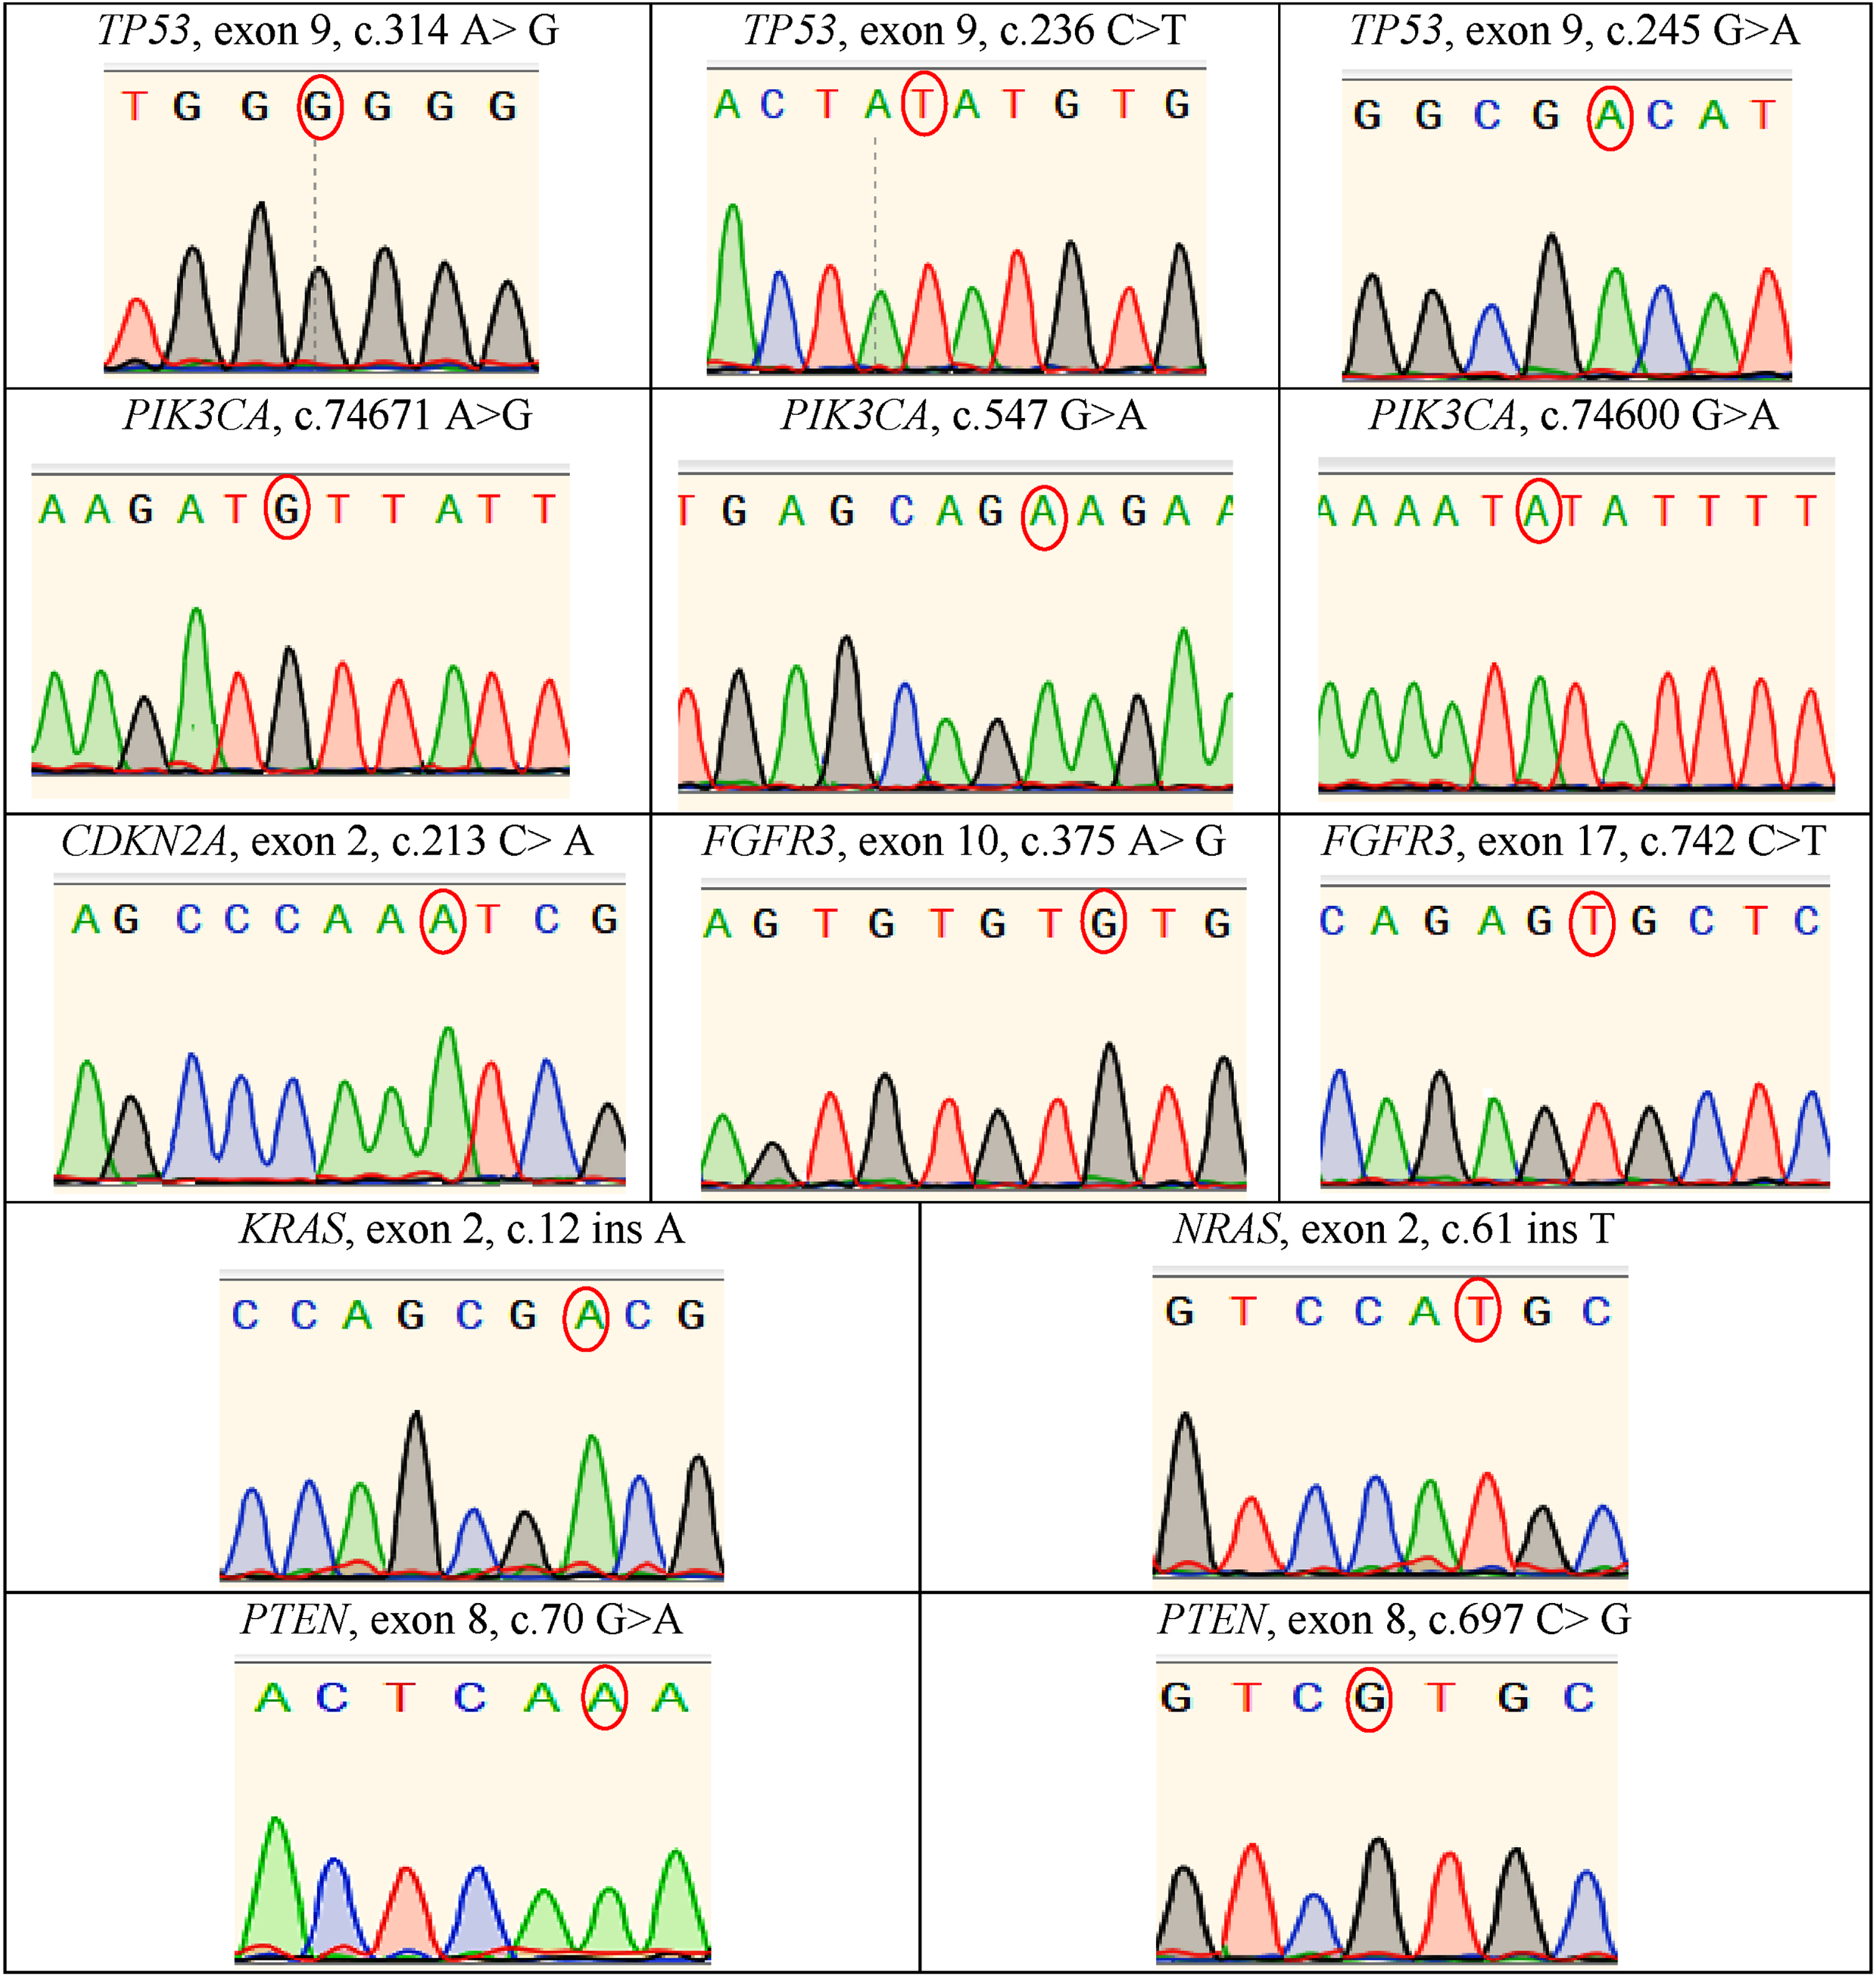 Electropherograms derived through the Sanger sequencing technique indicated of biological mutations in such genes as TP53, CDKN2A, PIK3CA, FGFR3, NRAS, KRAS and PTEN genes.